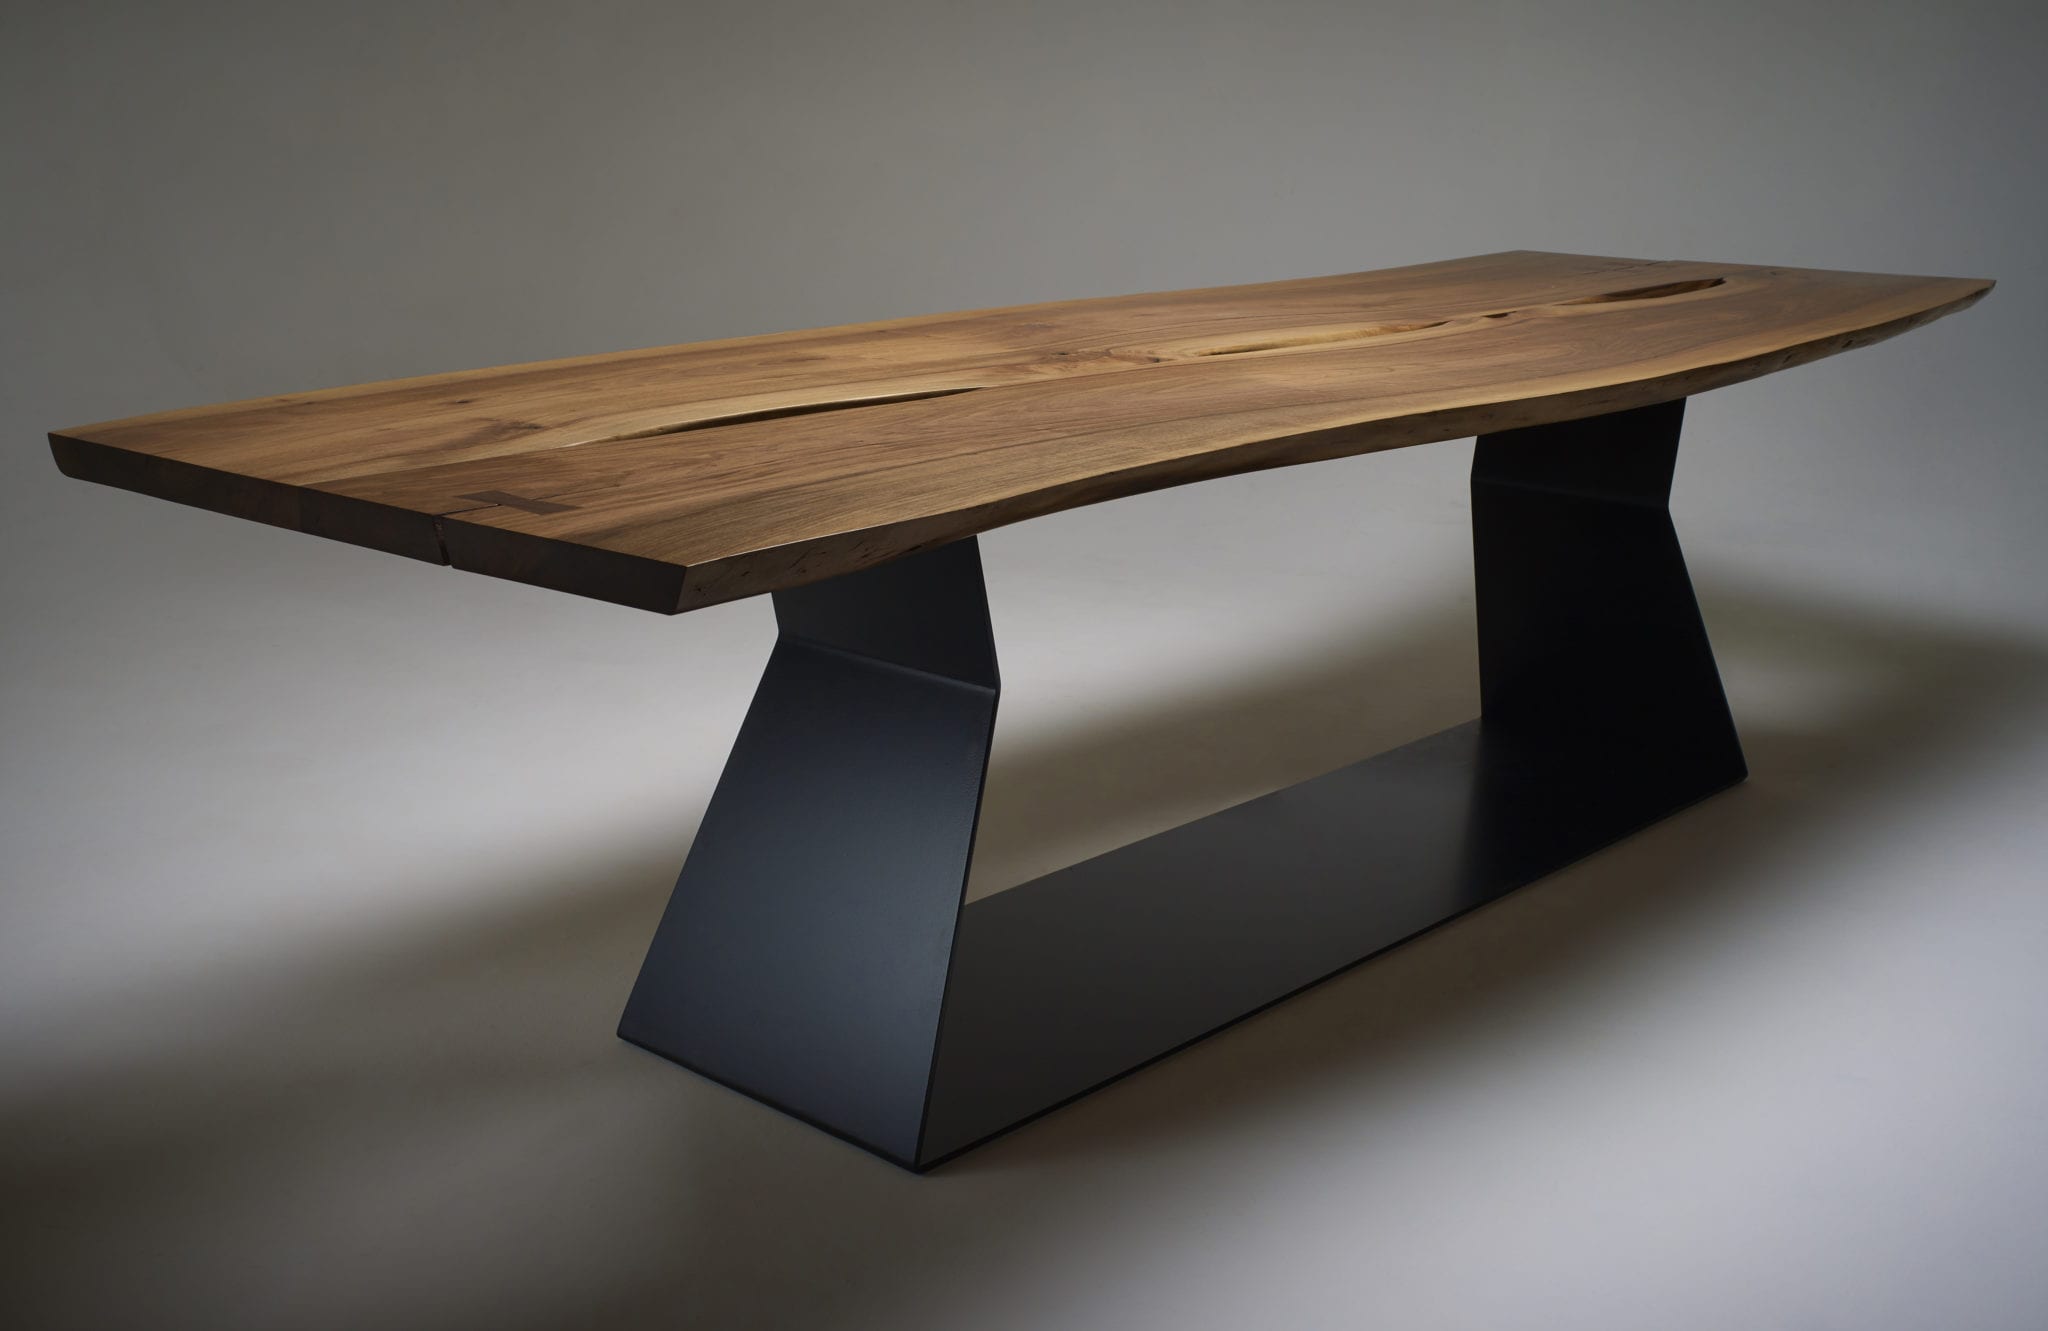 Why Buy a Bespoke, Live Edge Dining Table?